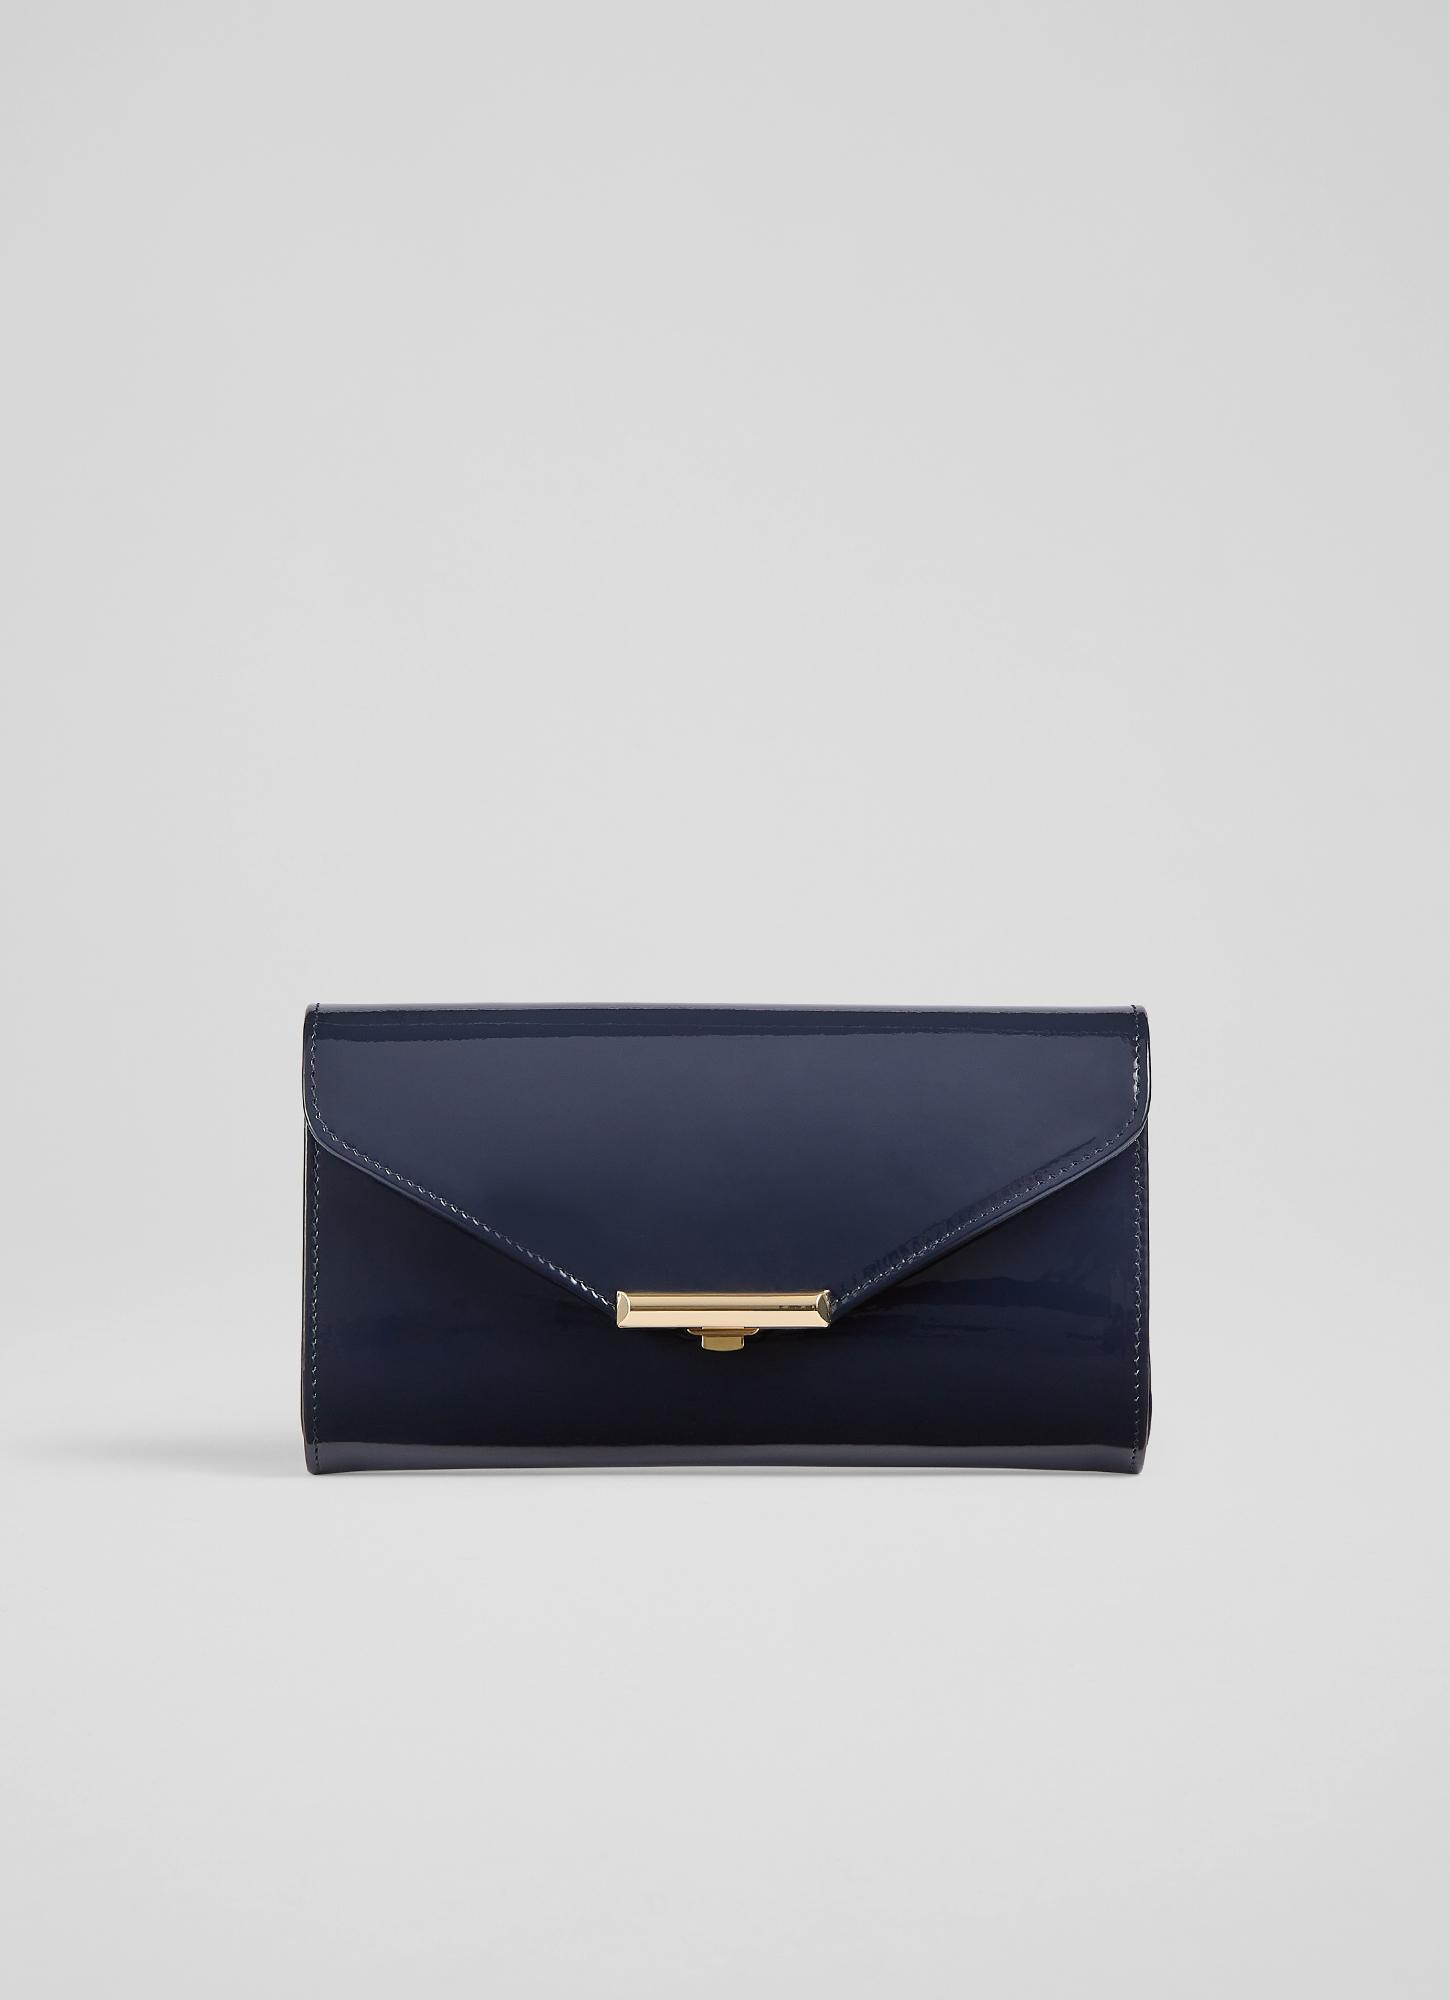 L.K.Bennett Lucy Navy Patent Leather Clutch Bag, Navy